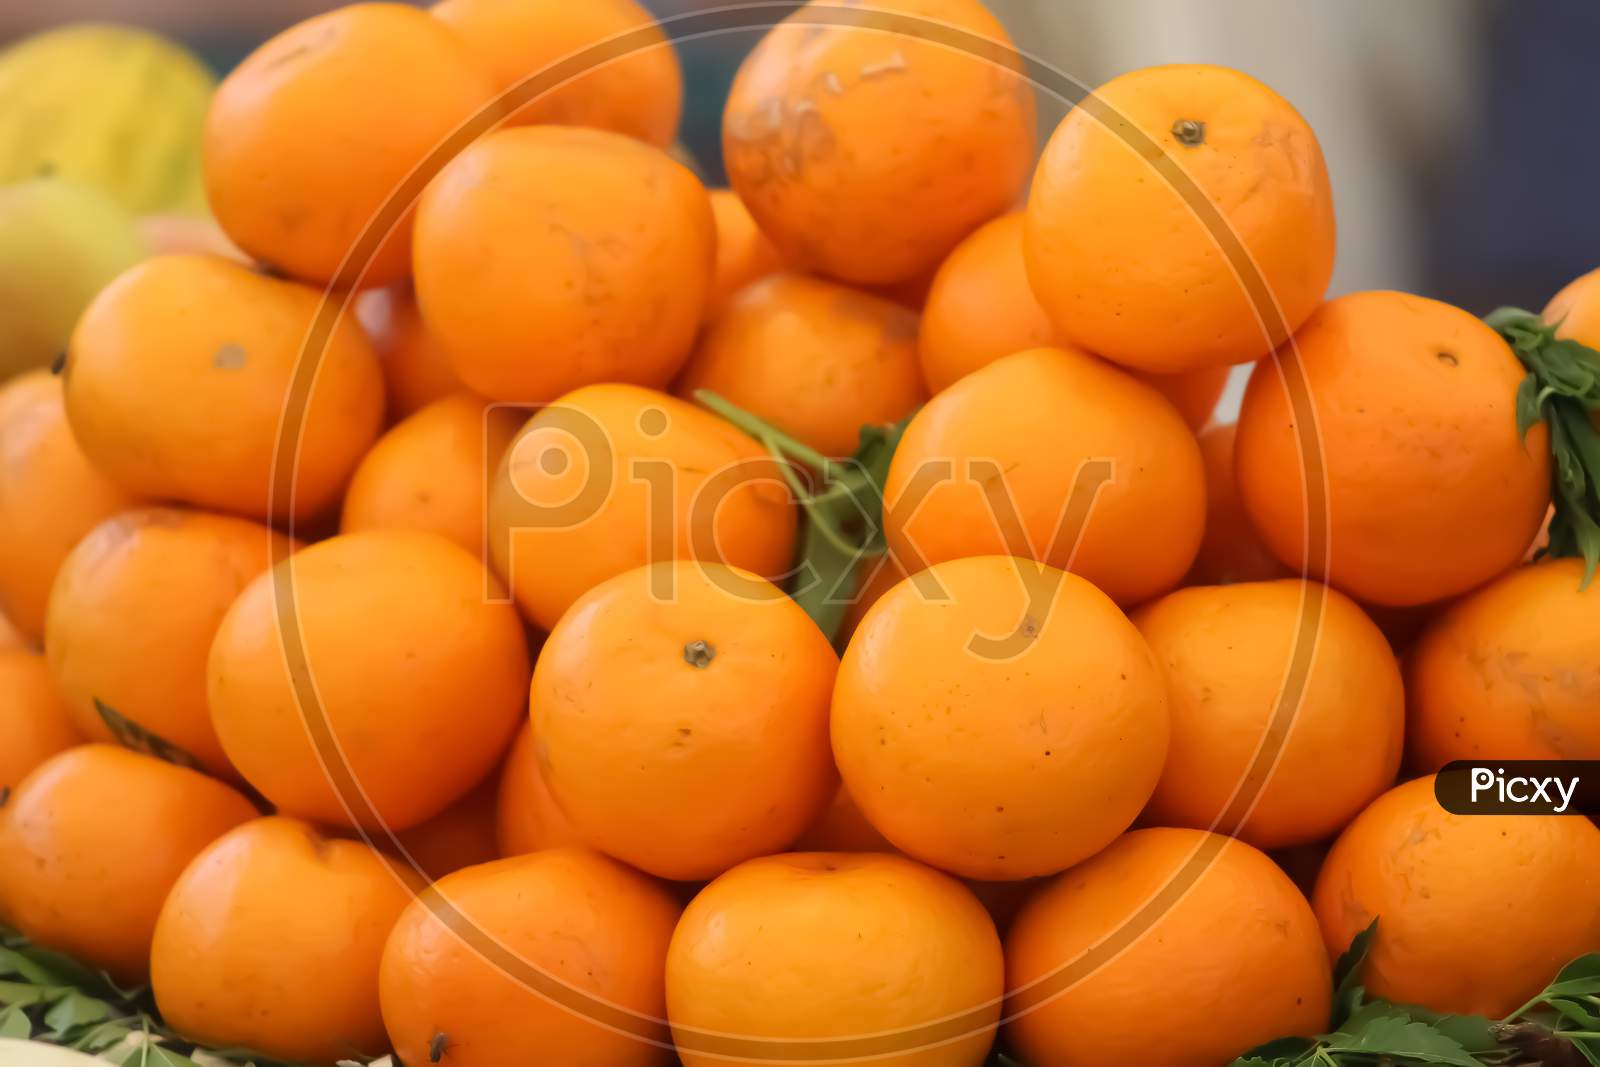 Oranges are placed in order